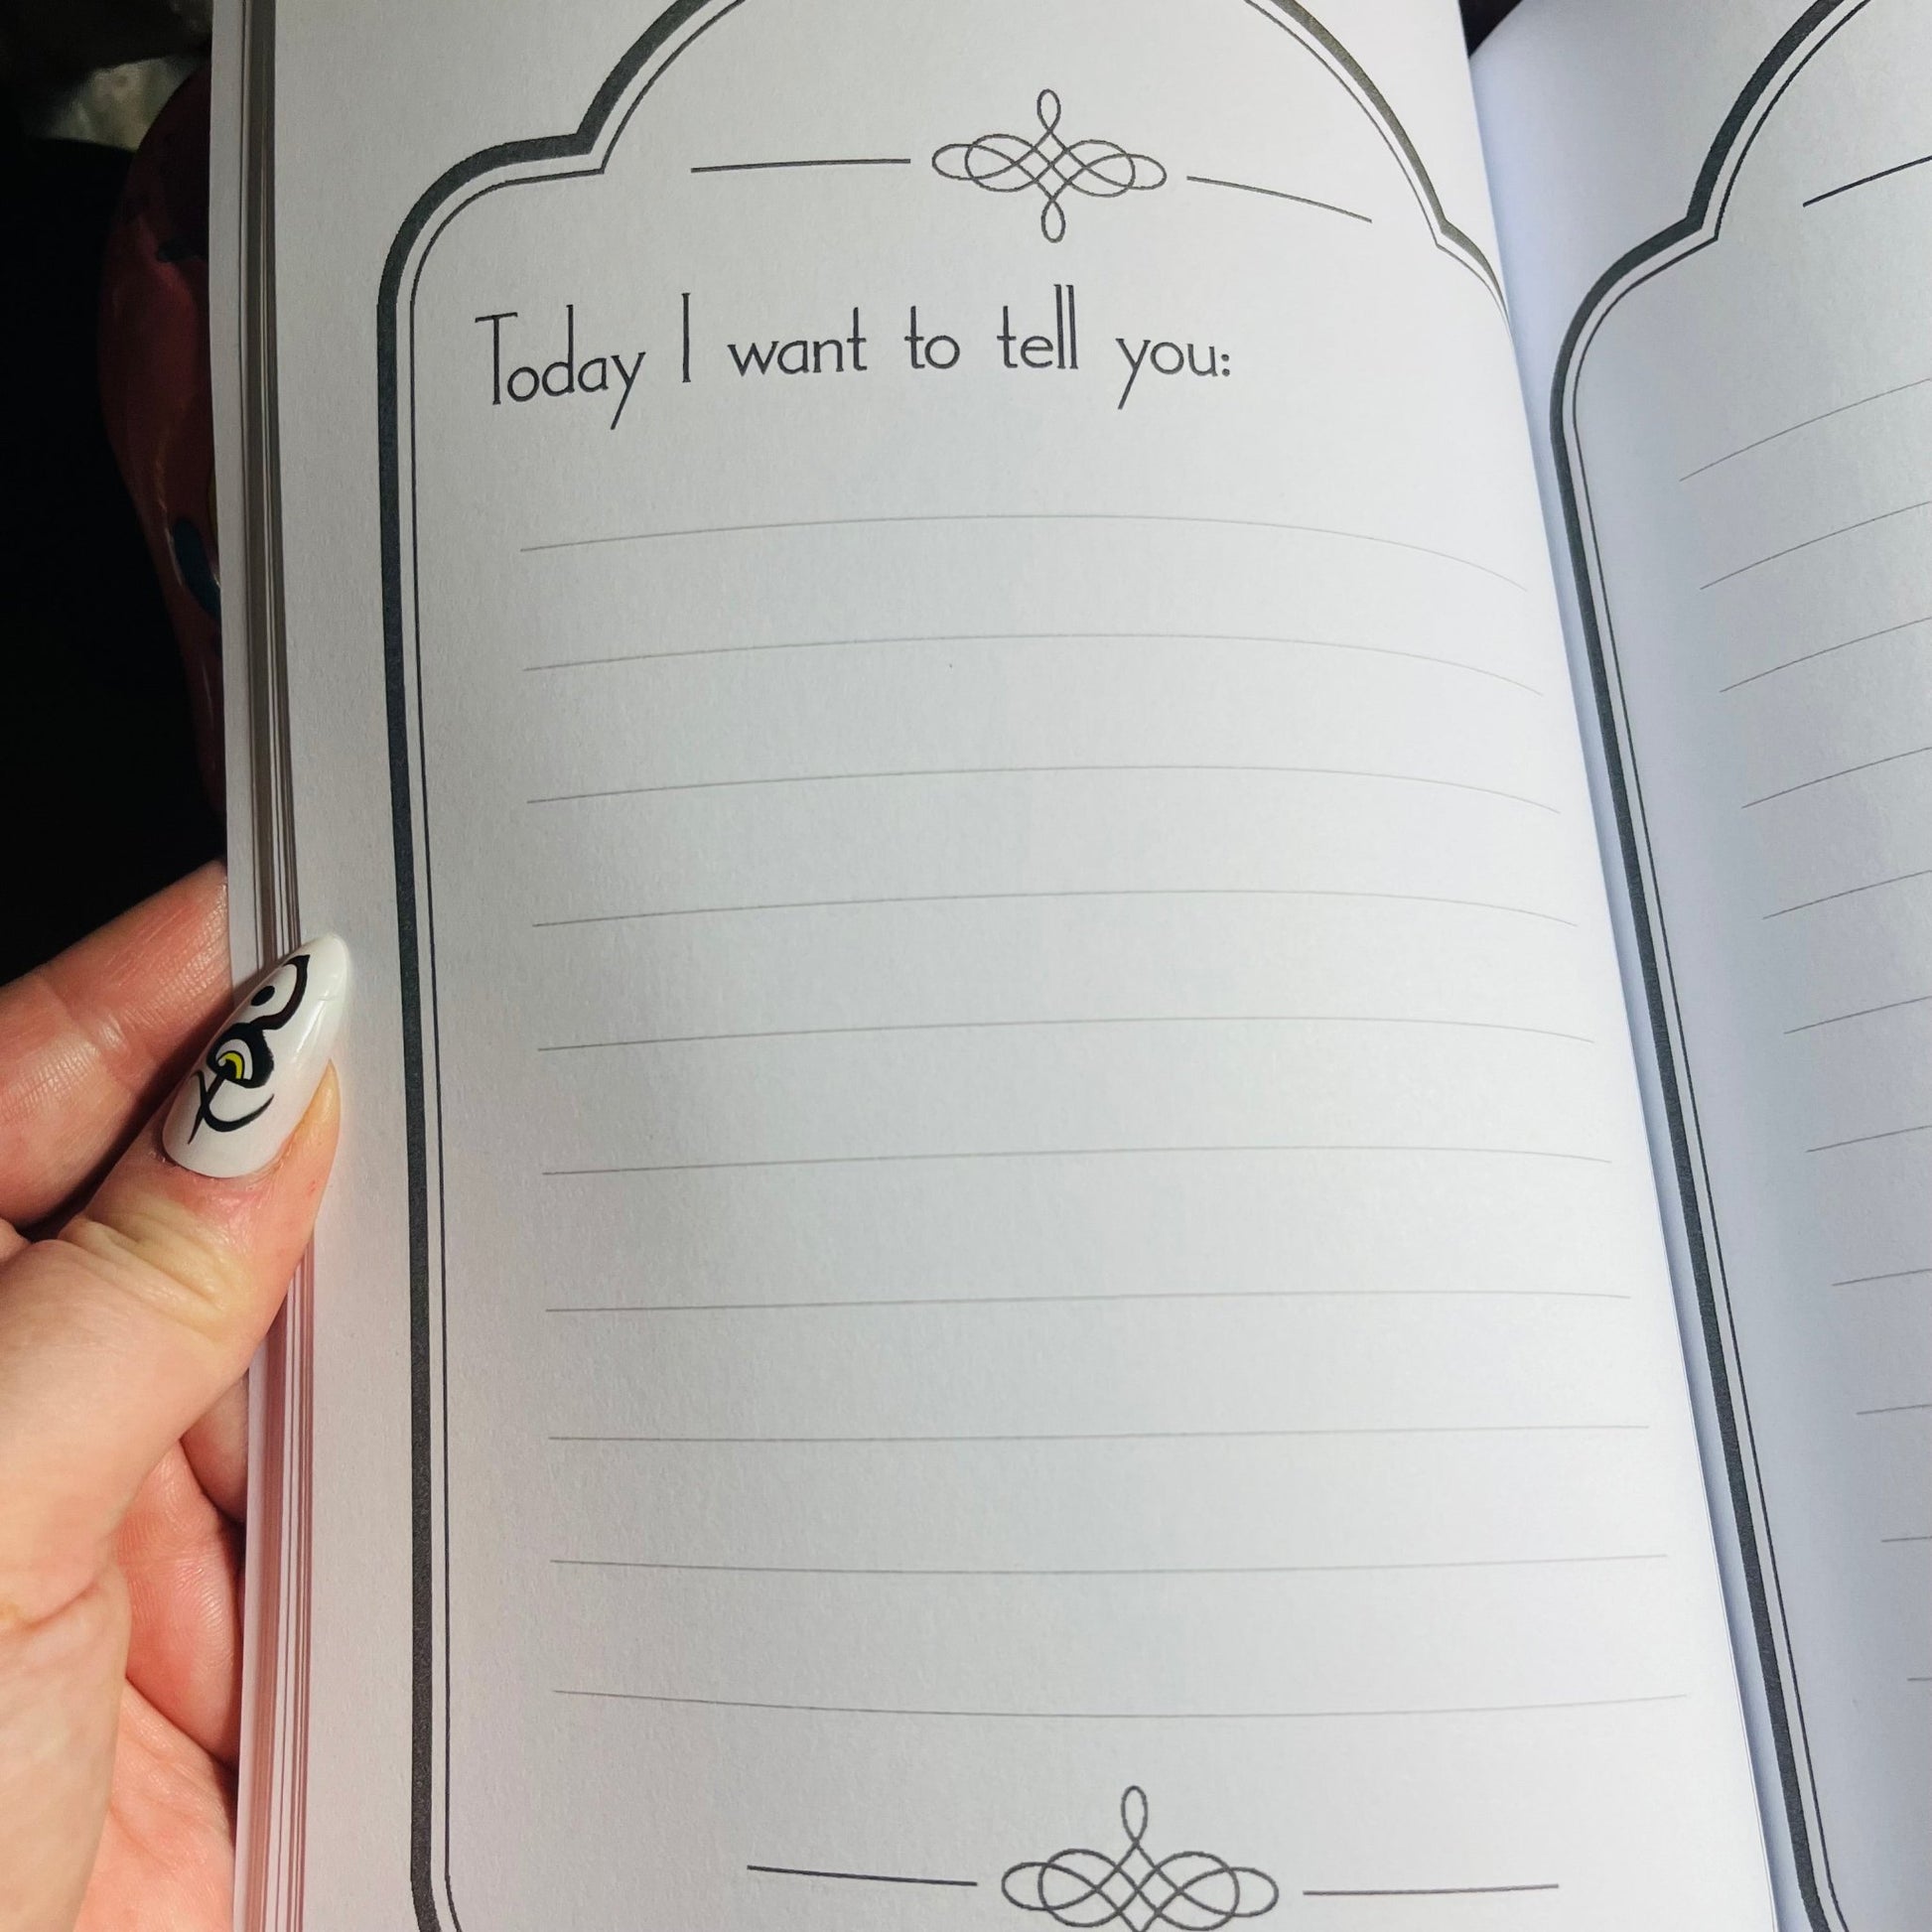 RESTOCKED! Missing You Grief Journal - Bubbas Meltys